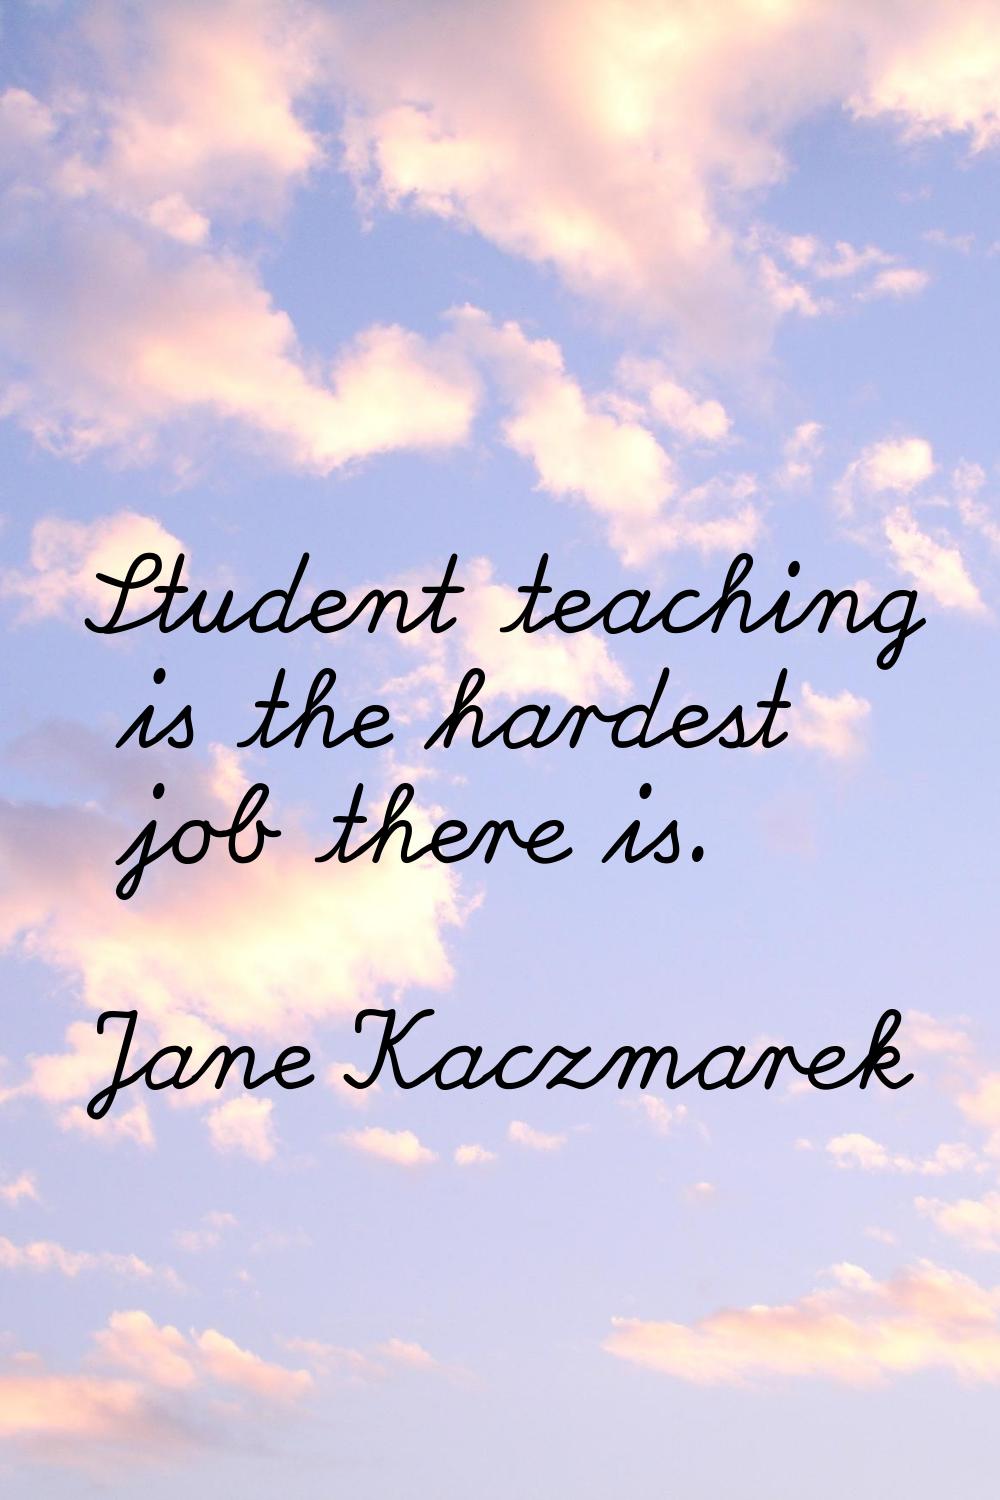 Student teaching is the hardest job there is.